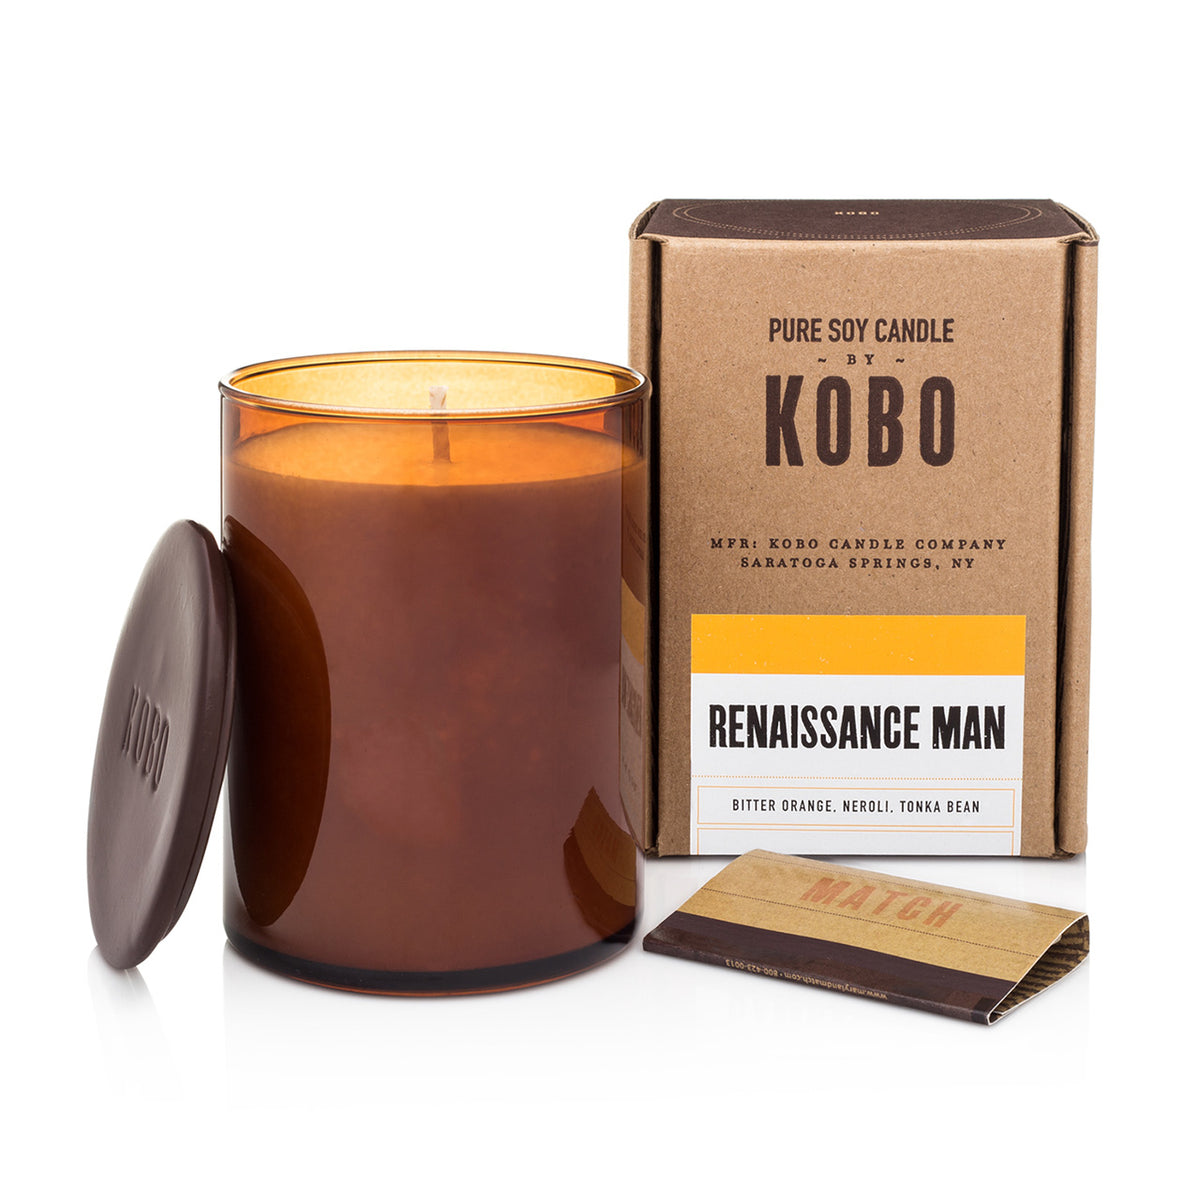 Kobo Large Pure Soy Candle in an amber glass jar with ceramic lid, matches and kraft box. Renaissance Man scent